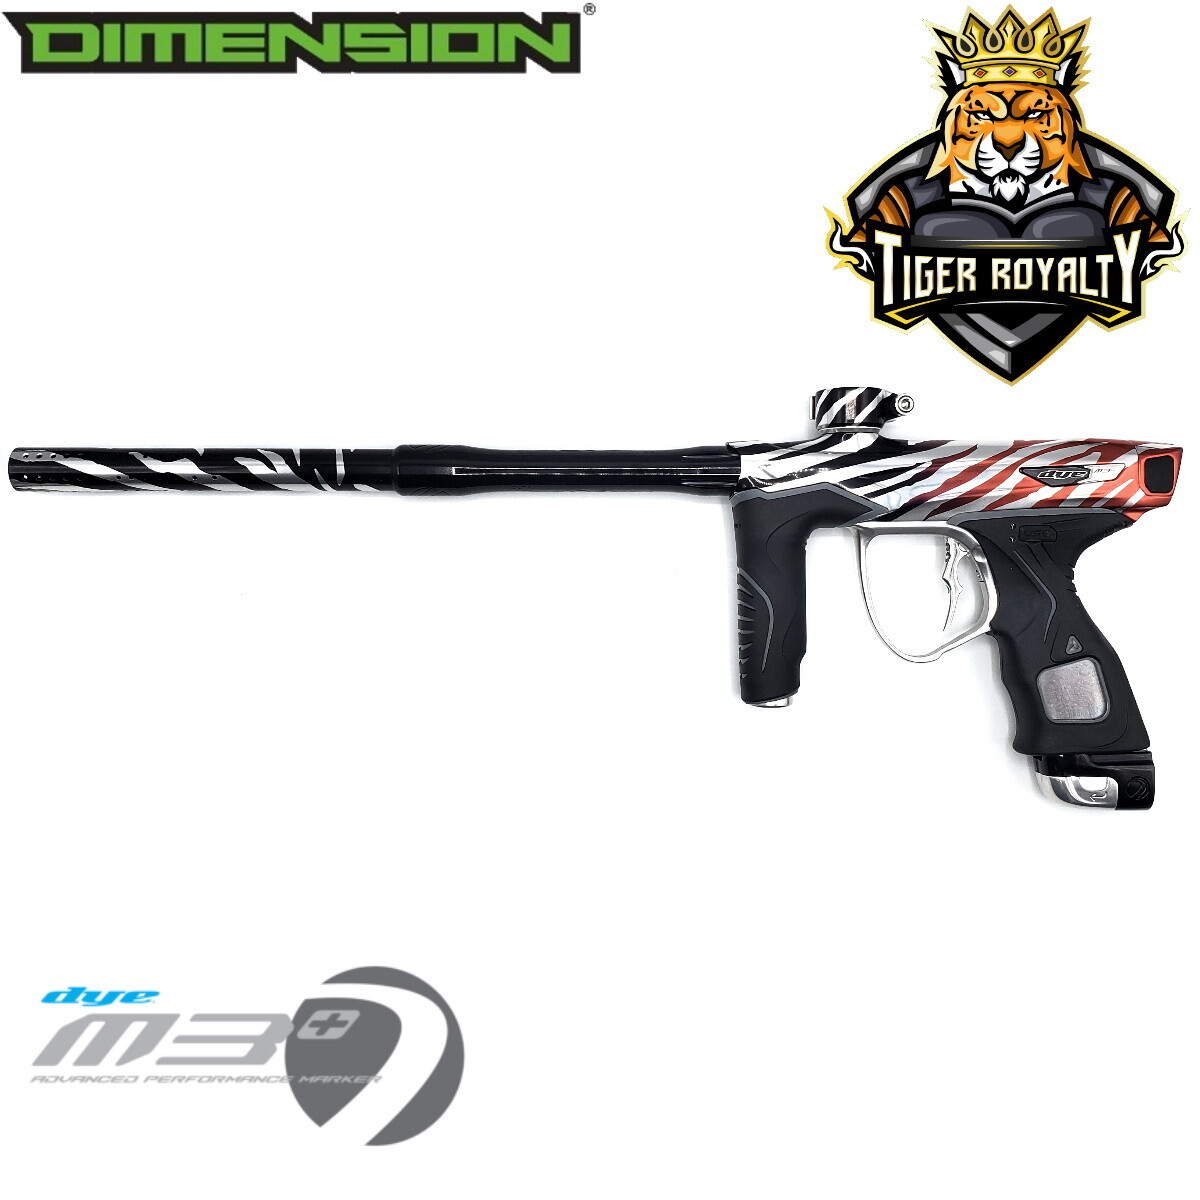 Dye M3+ - Dimension Limited Edition 1 of 1 / Tiger Royalty - Iron Tiger